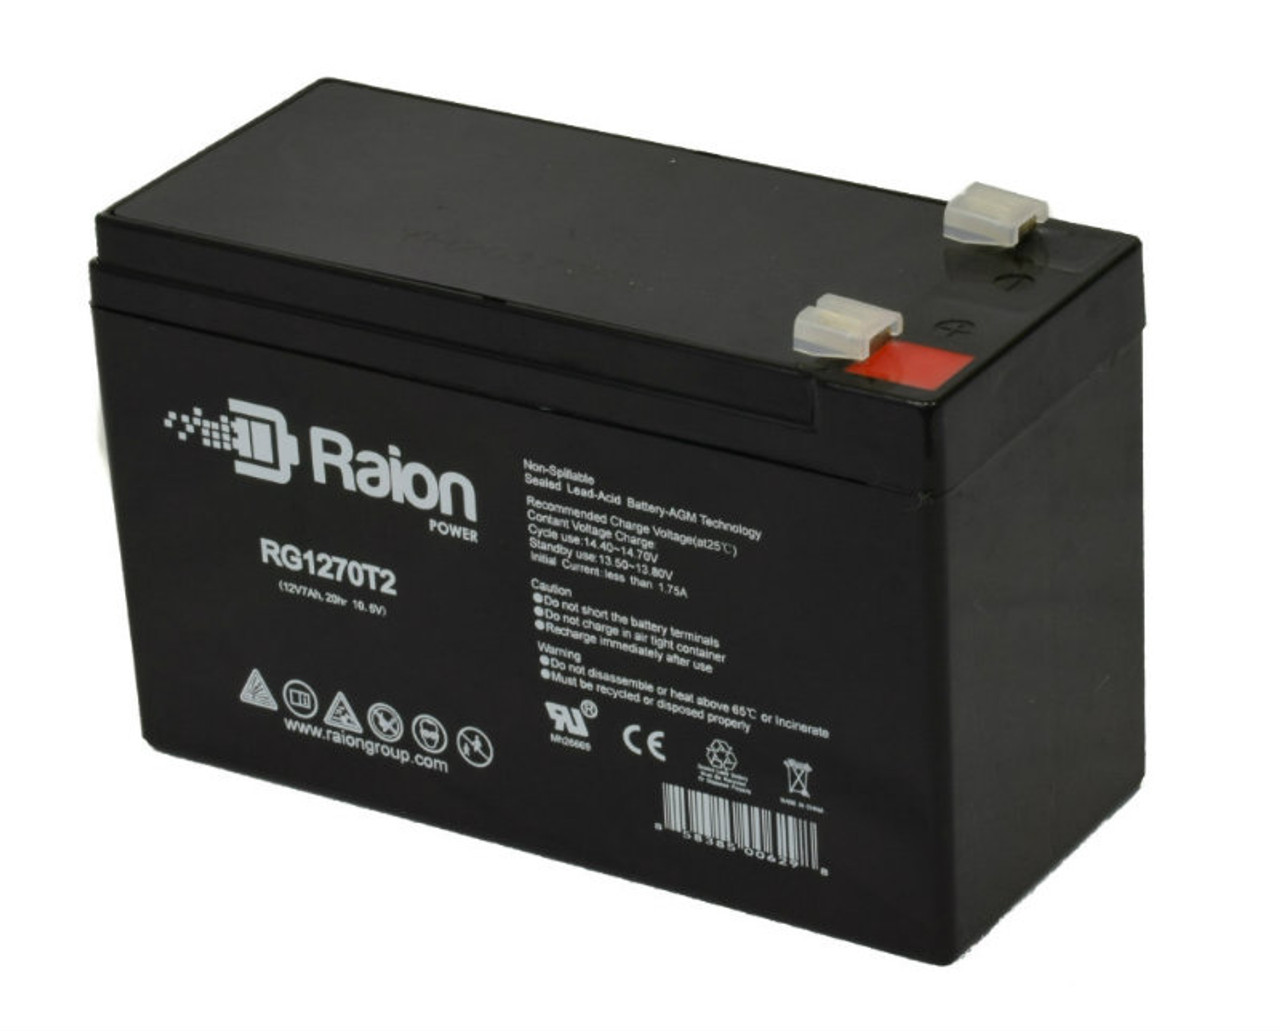 Raion Power Replacement 12V 7Ah Battery for Aosom 370-137WT 12V Ride On Truck with Wide Seat - 1 Pack